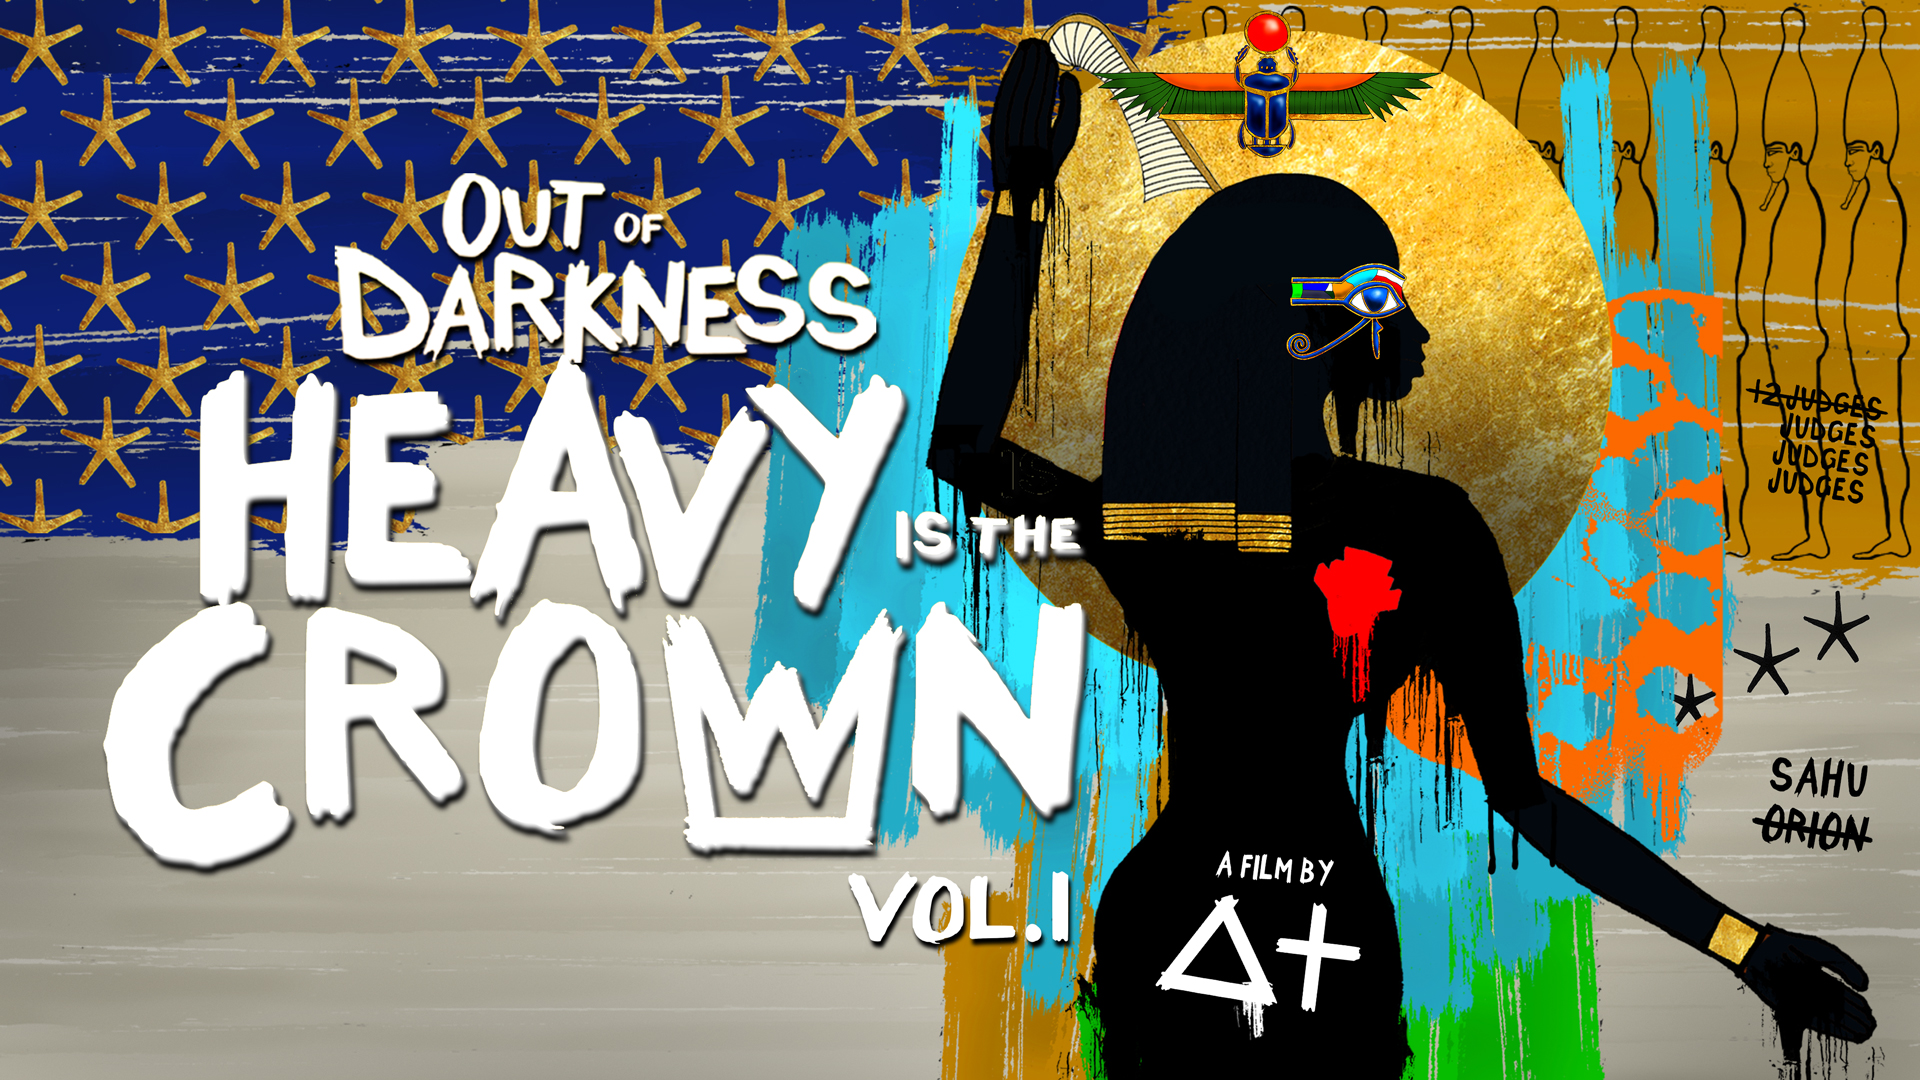 You are currently viewing Extra Date: South London Screening of ‘Out of Darkness: Heavy is the Crown Vol. 1’